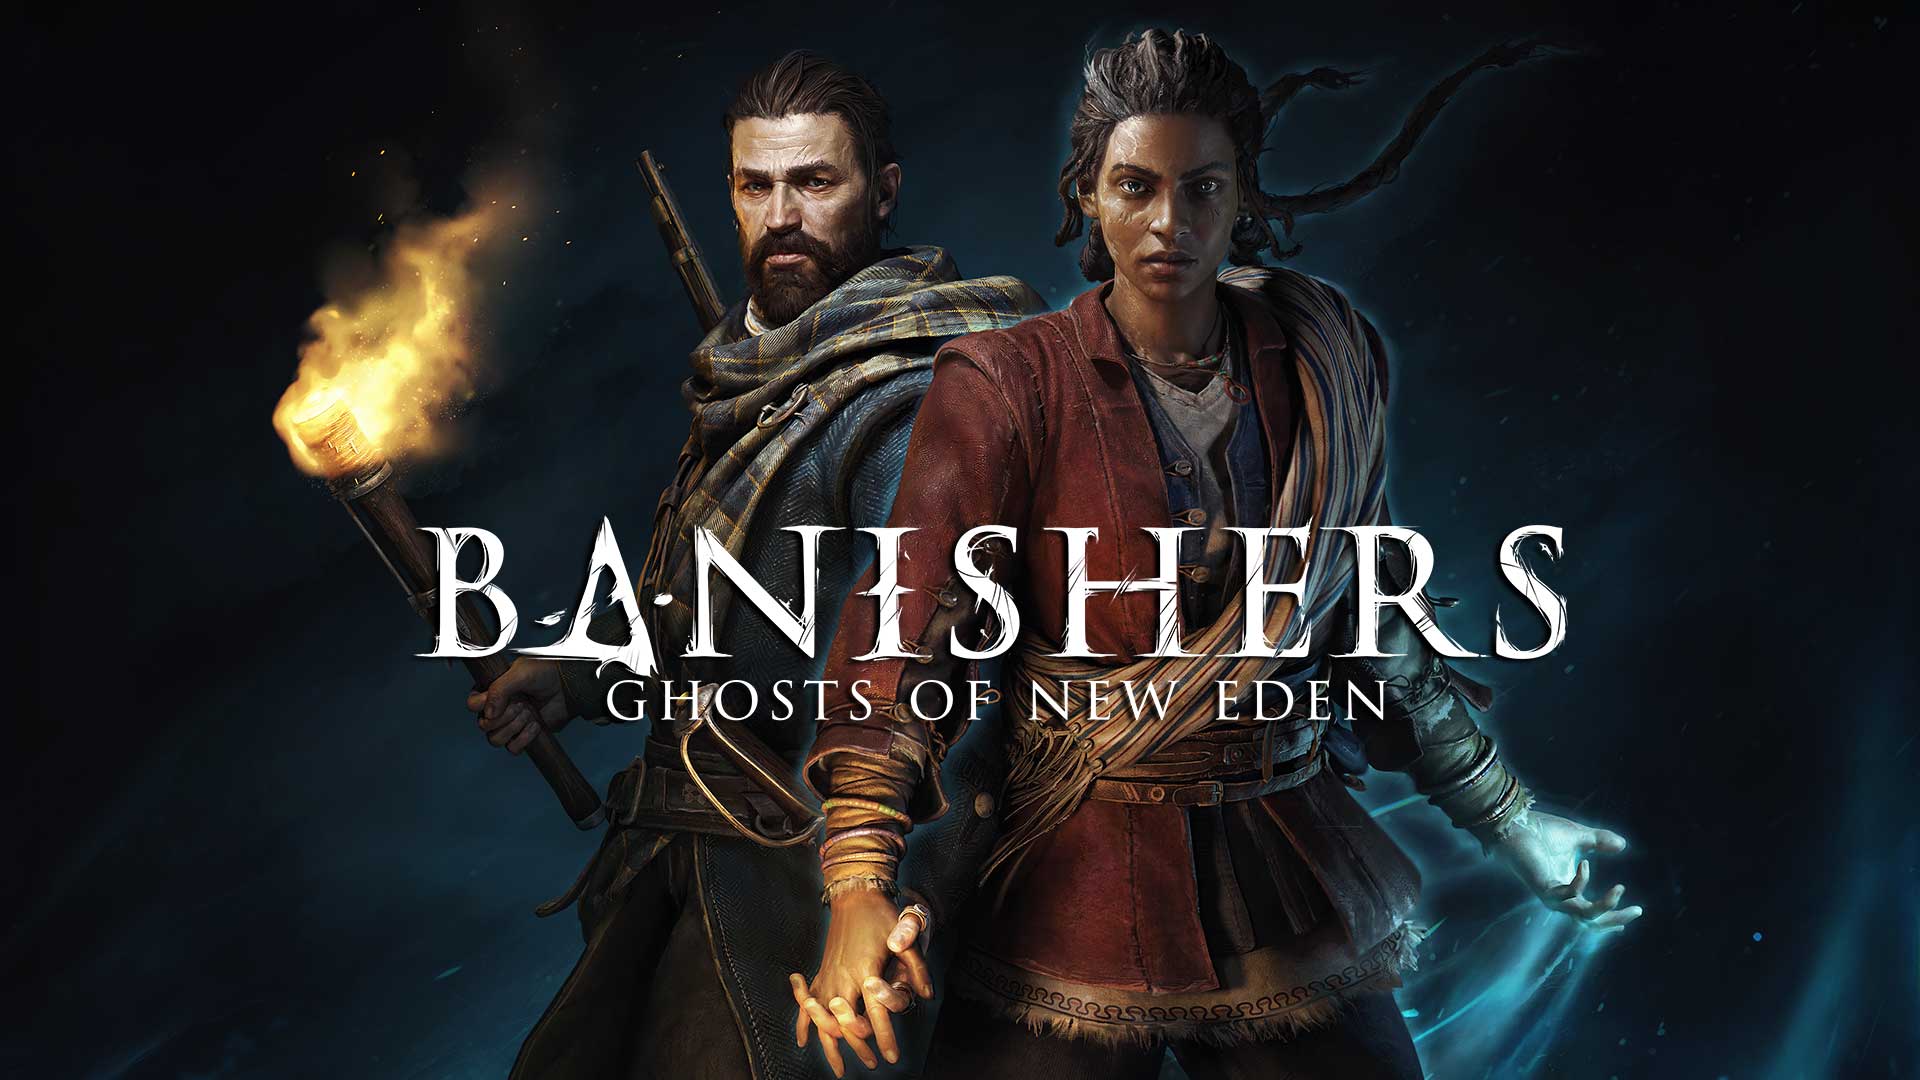 All You Need to Know about Banishers: Ghosts of New Eden